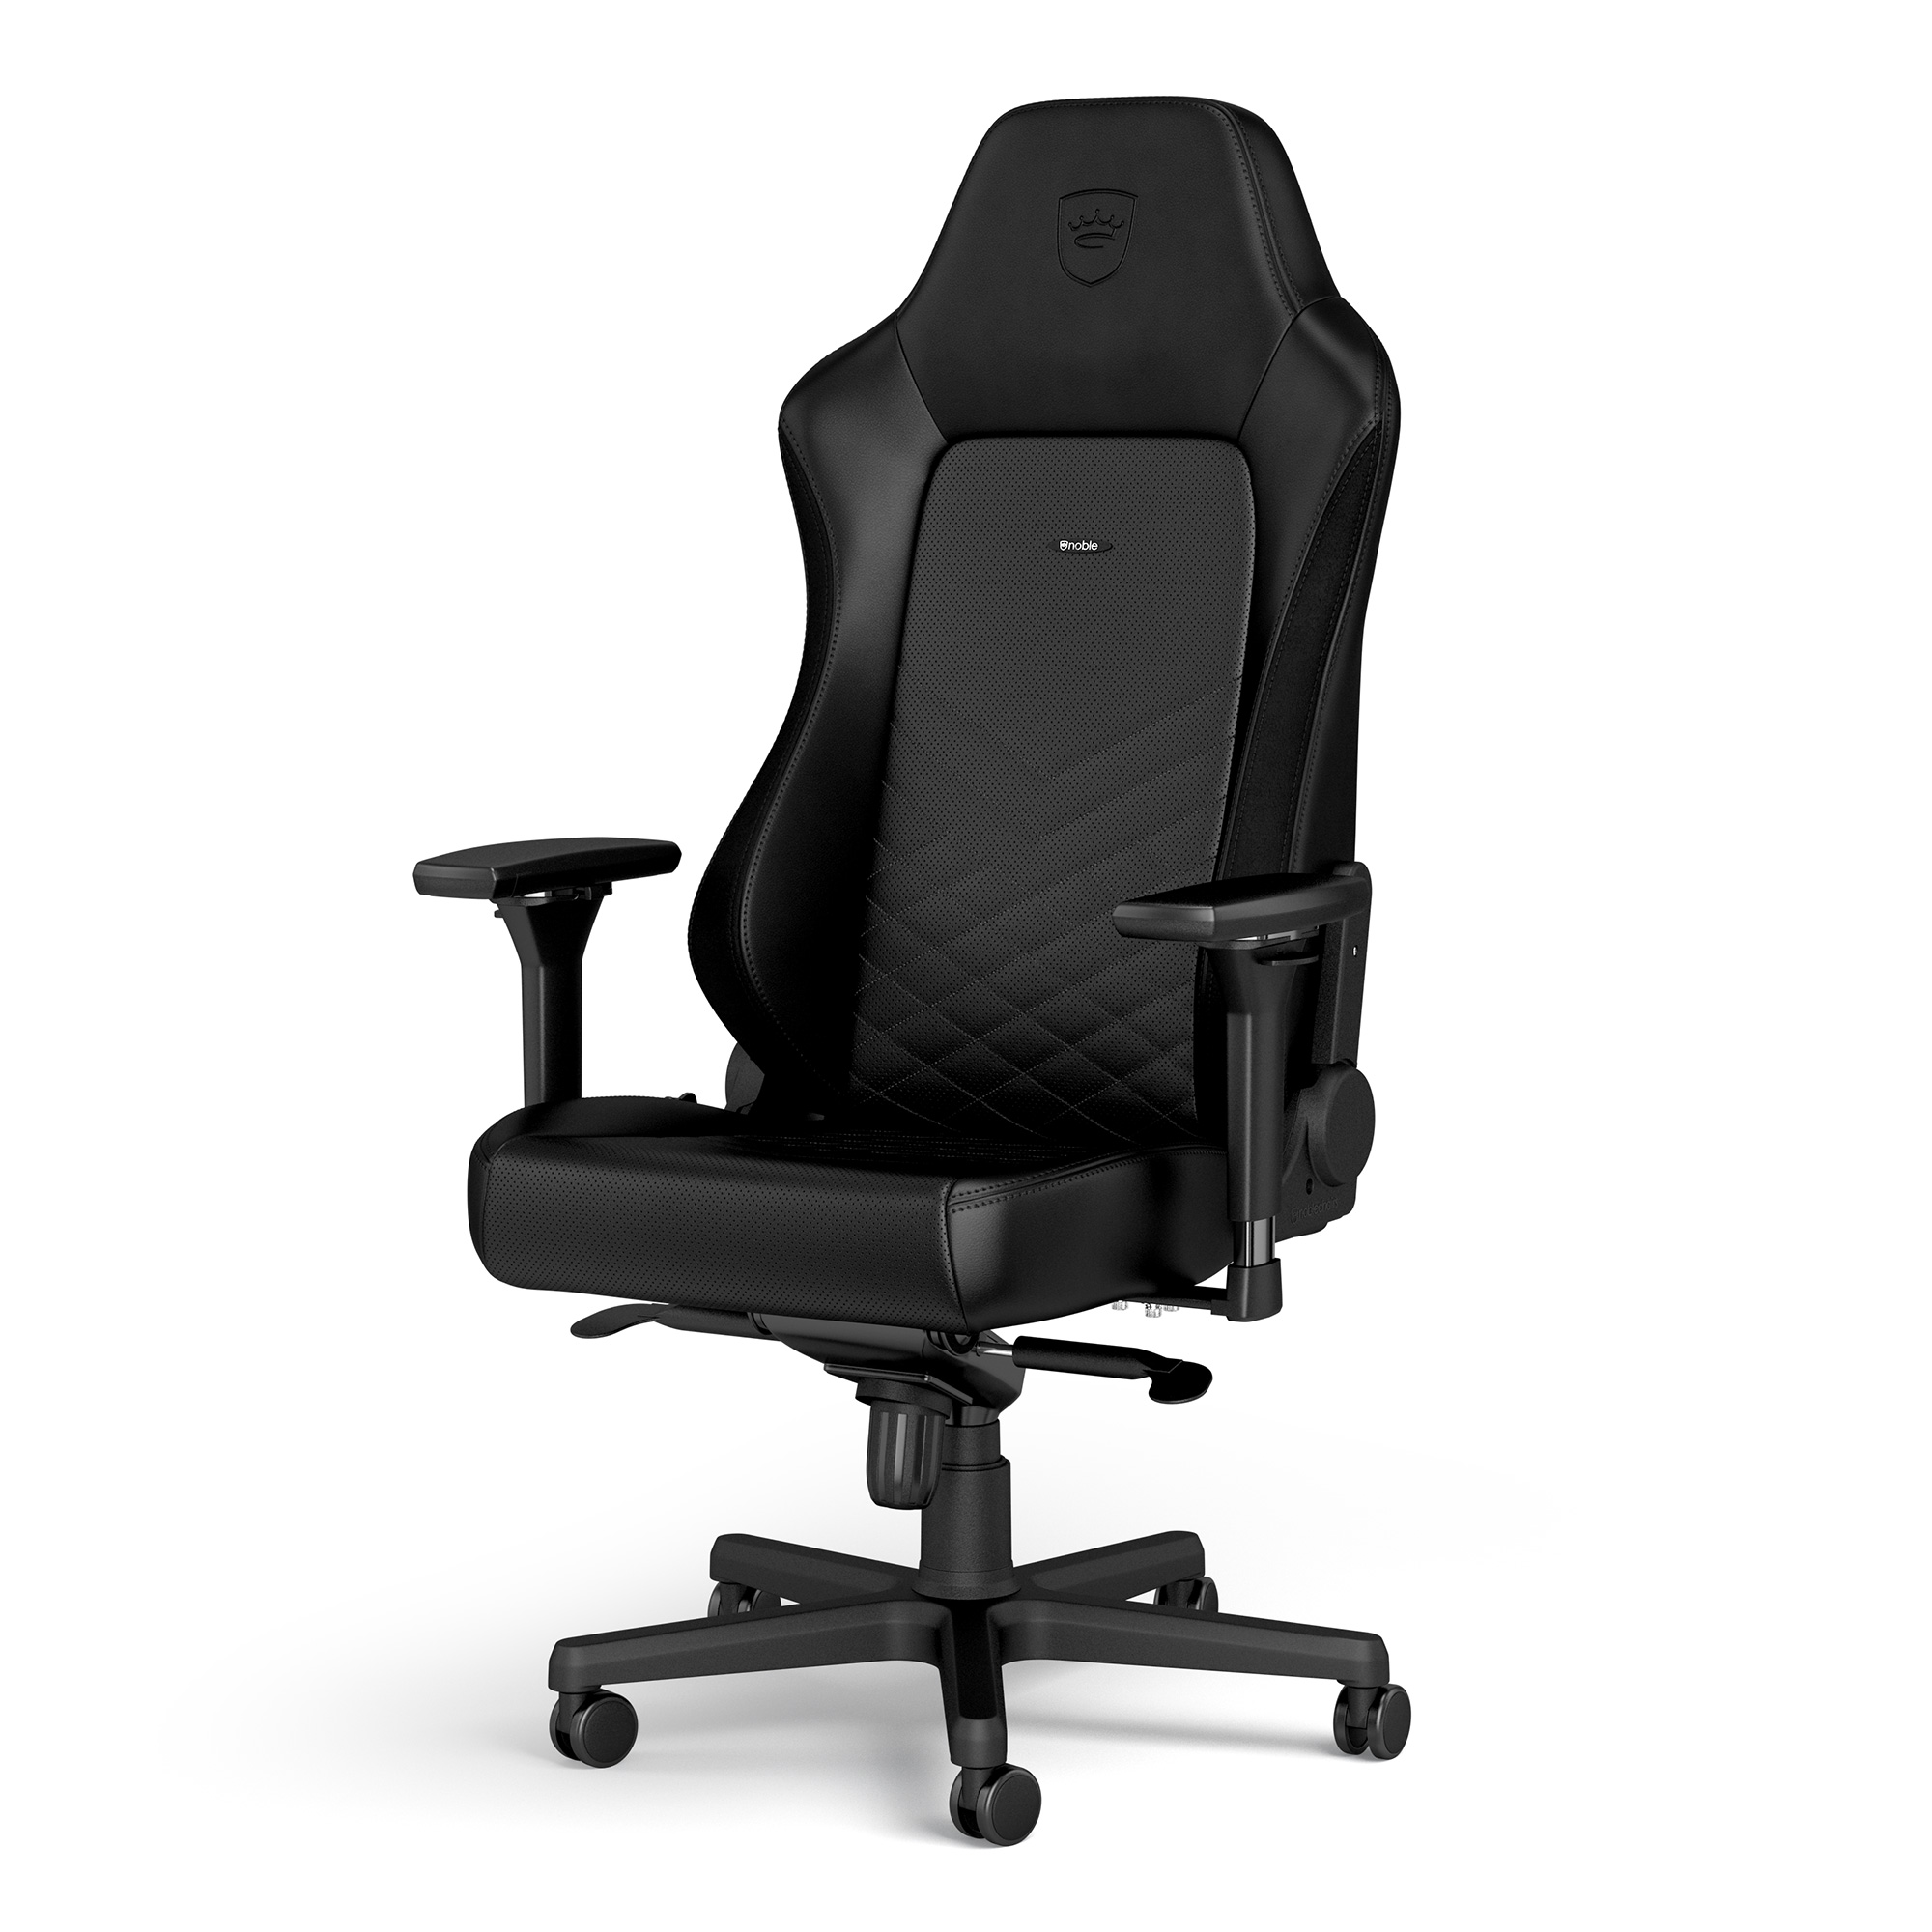 noblechairs - noblechairs HERO Gaming Chair - Black